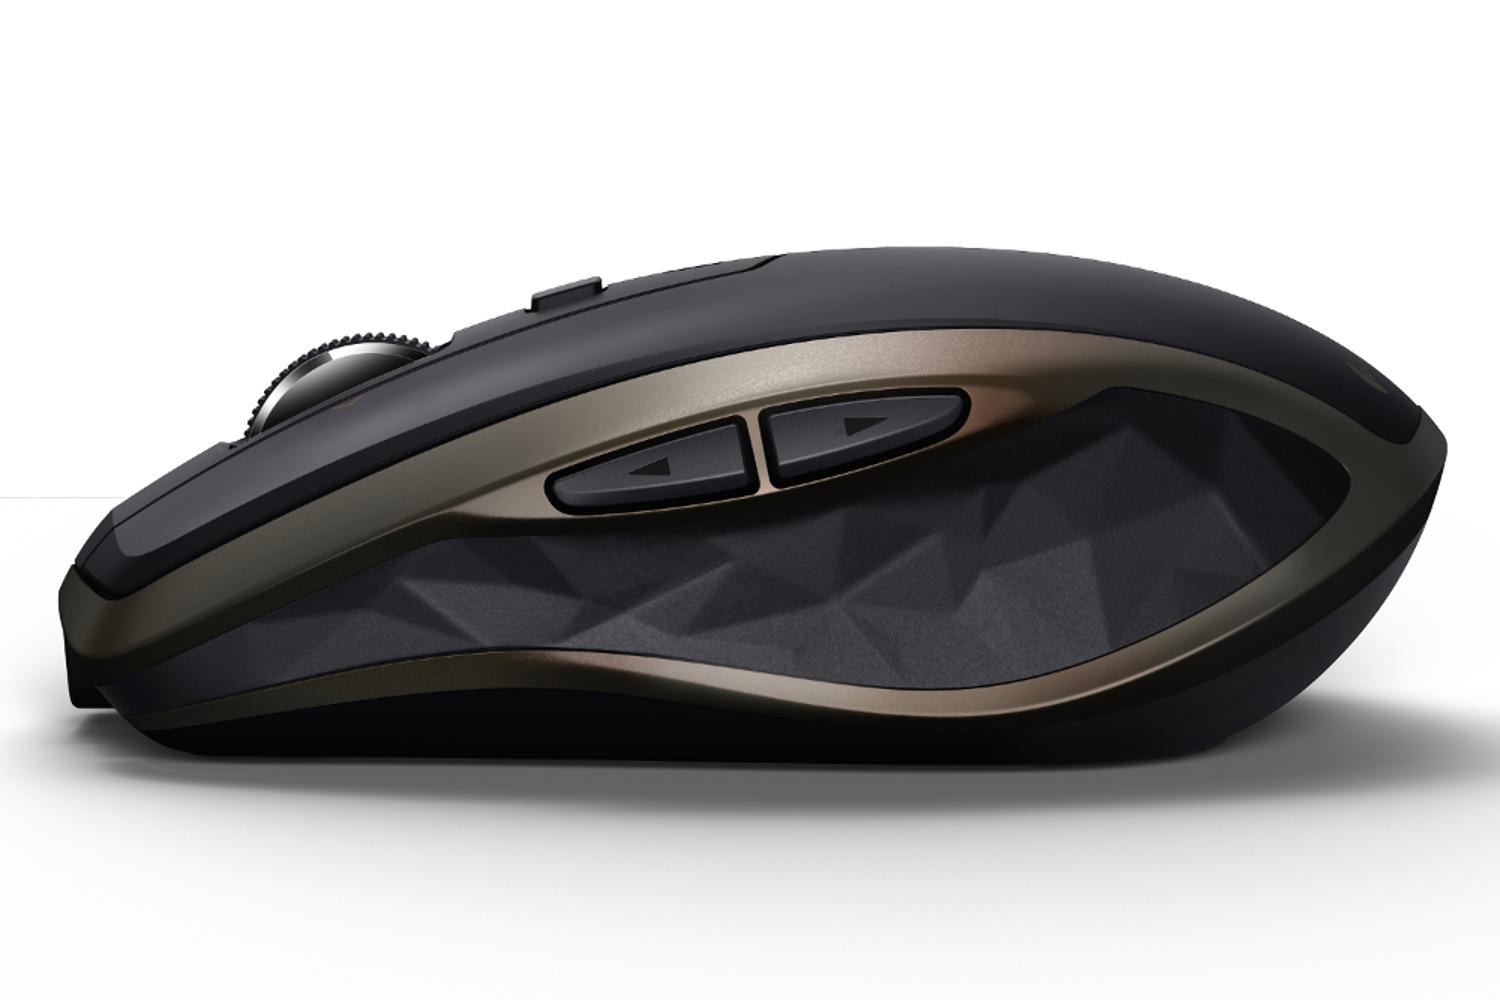 logitech introduces mx anywhere 2 wireless mobile mouse mxanywhere2 profile left